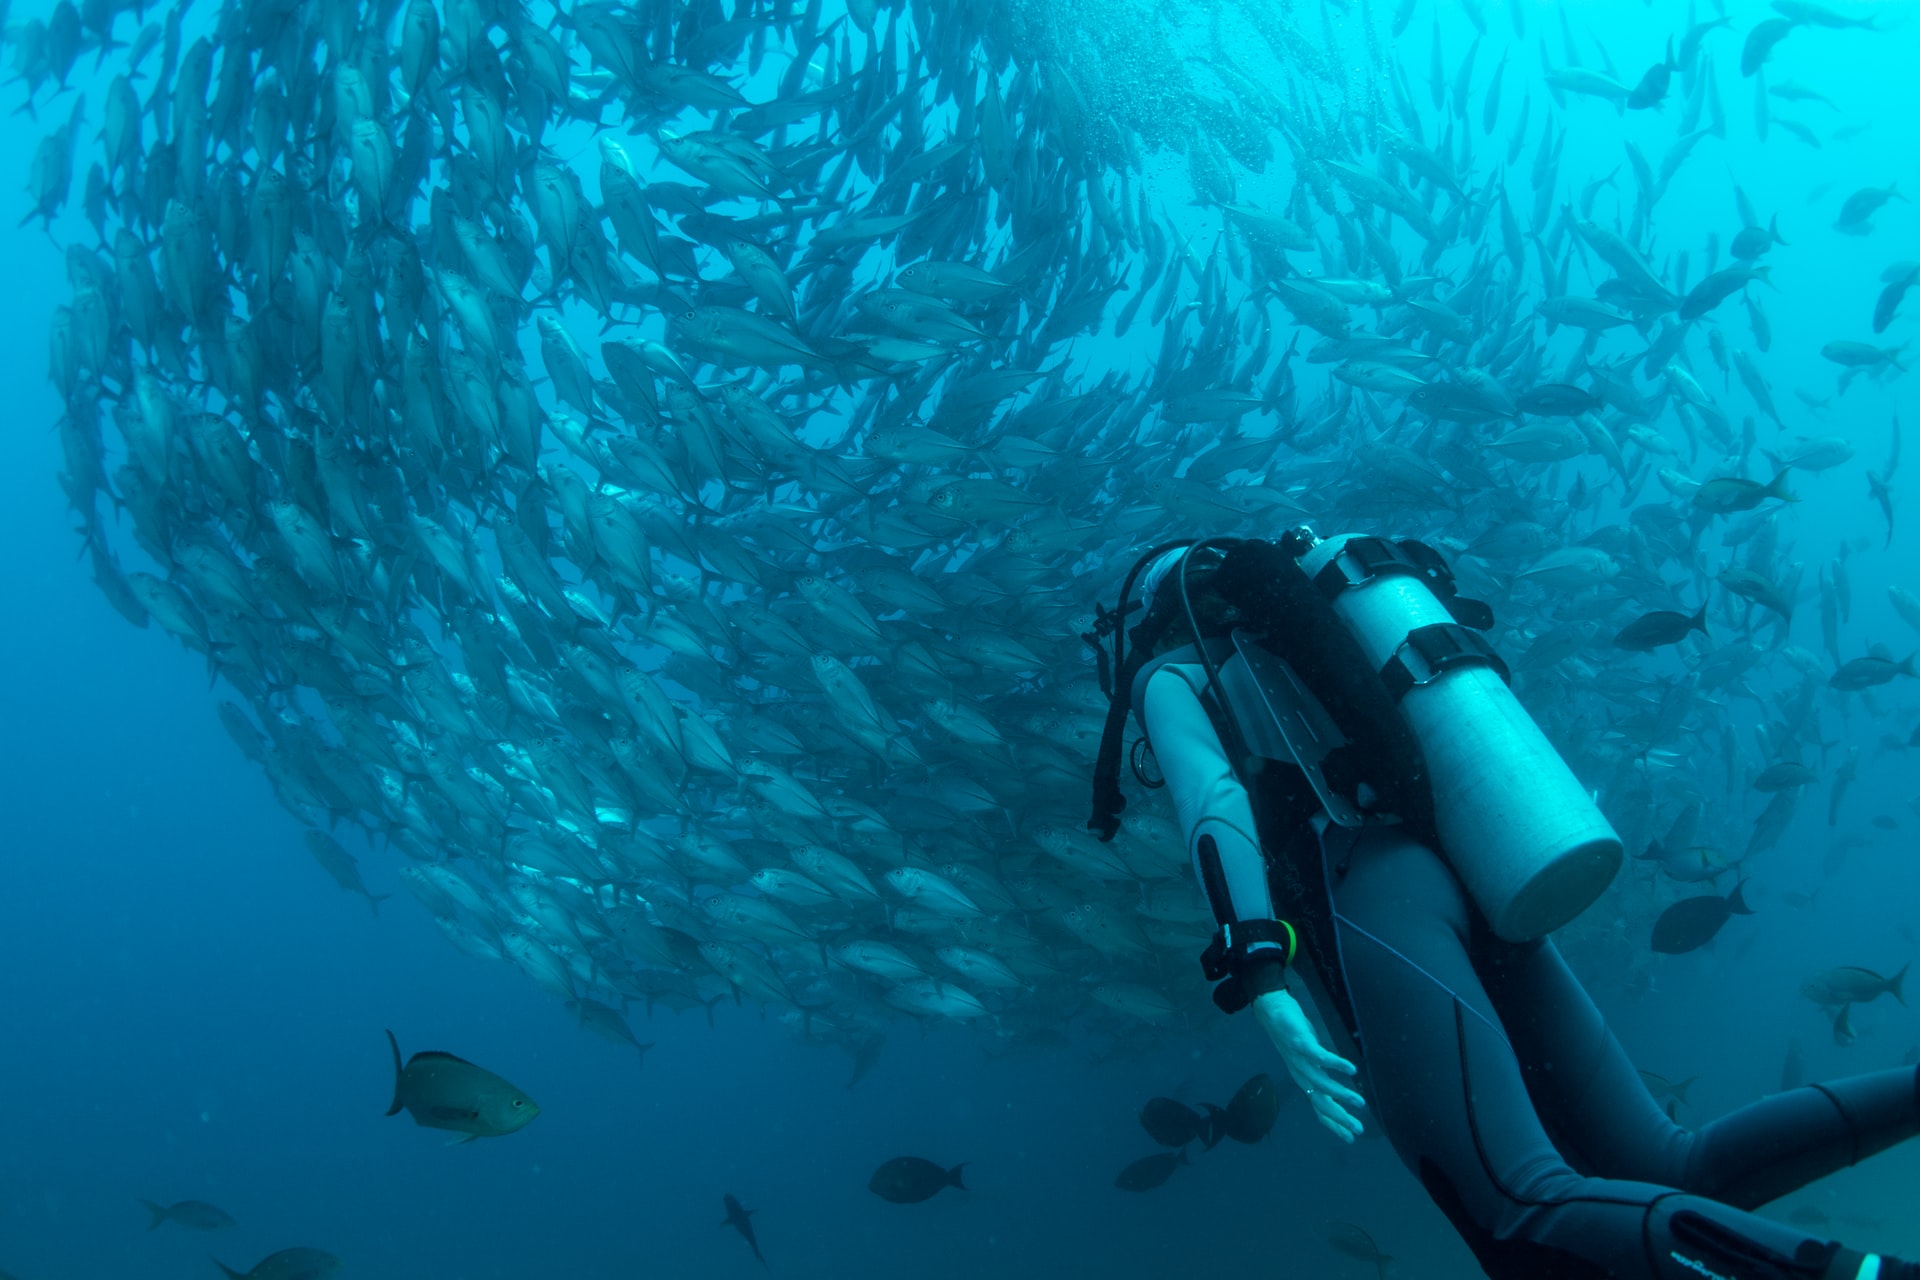 A scuba diver under the water beneath a swirling vortex of shimmering fish.